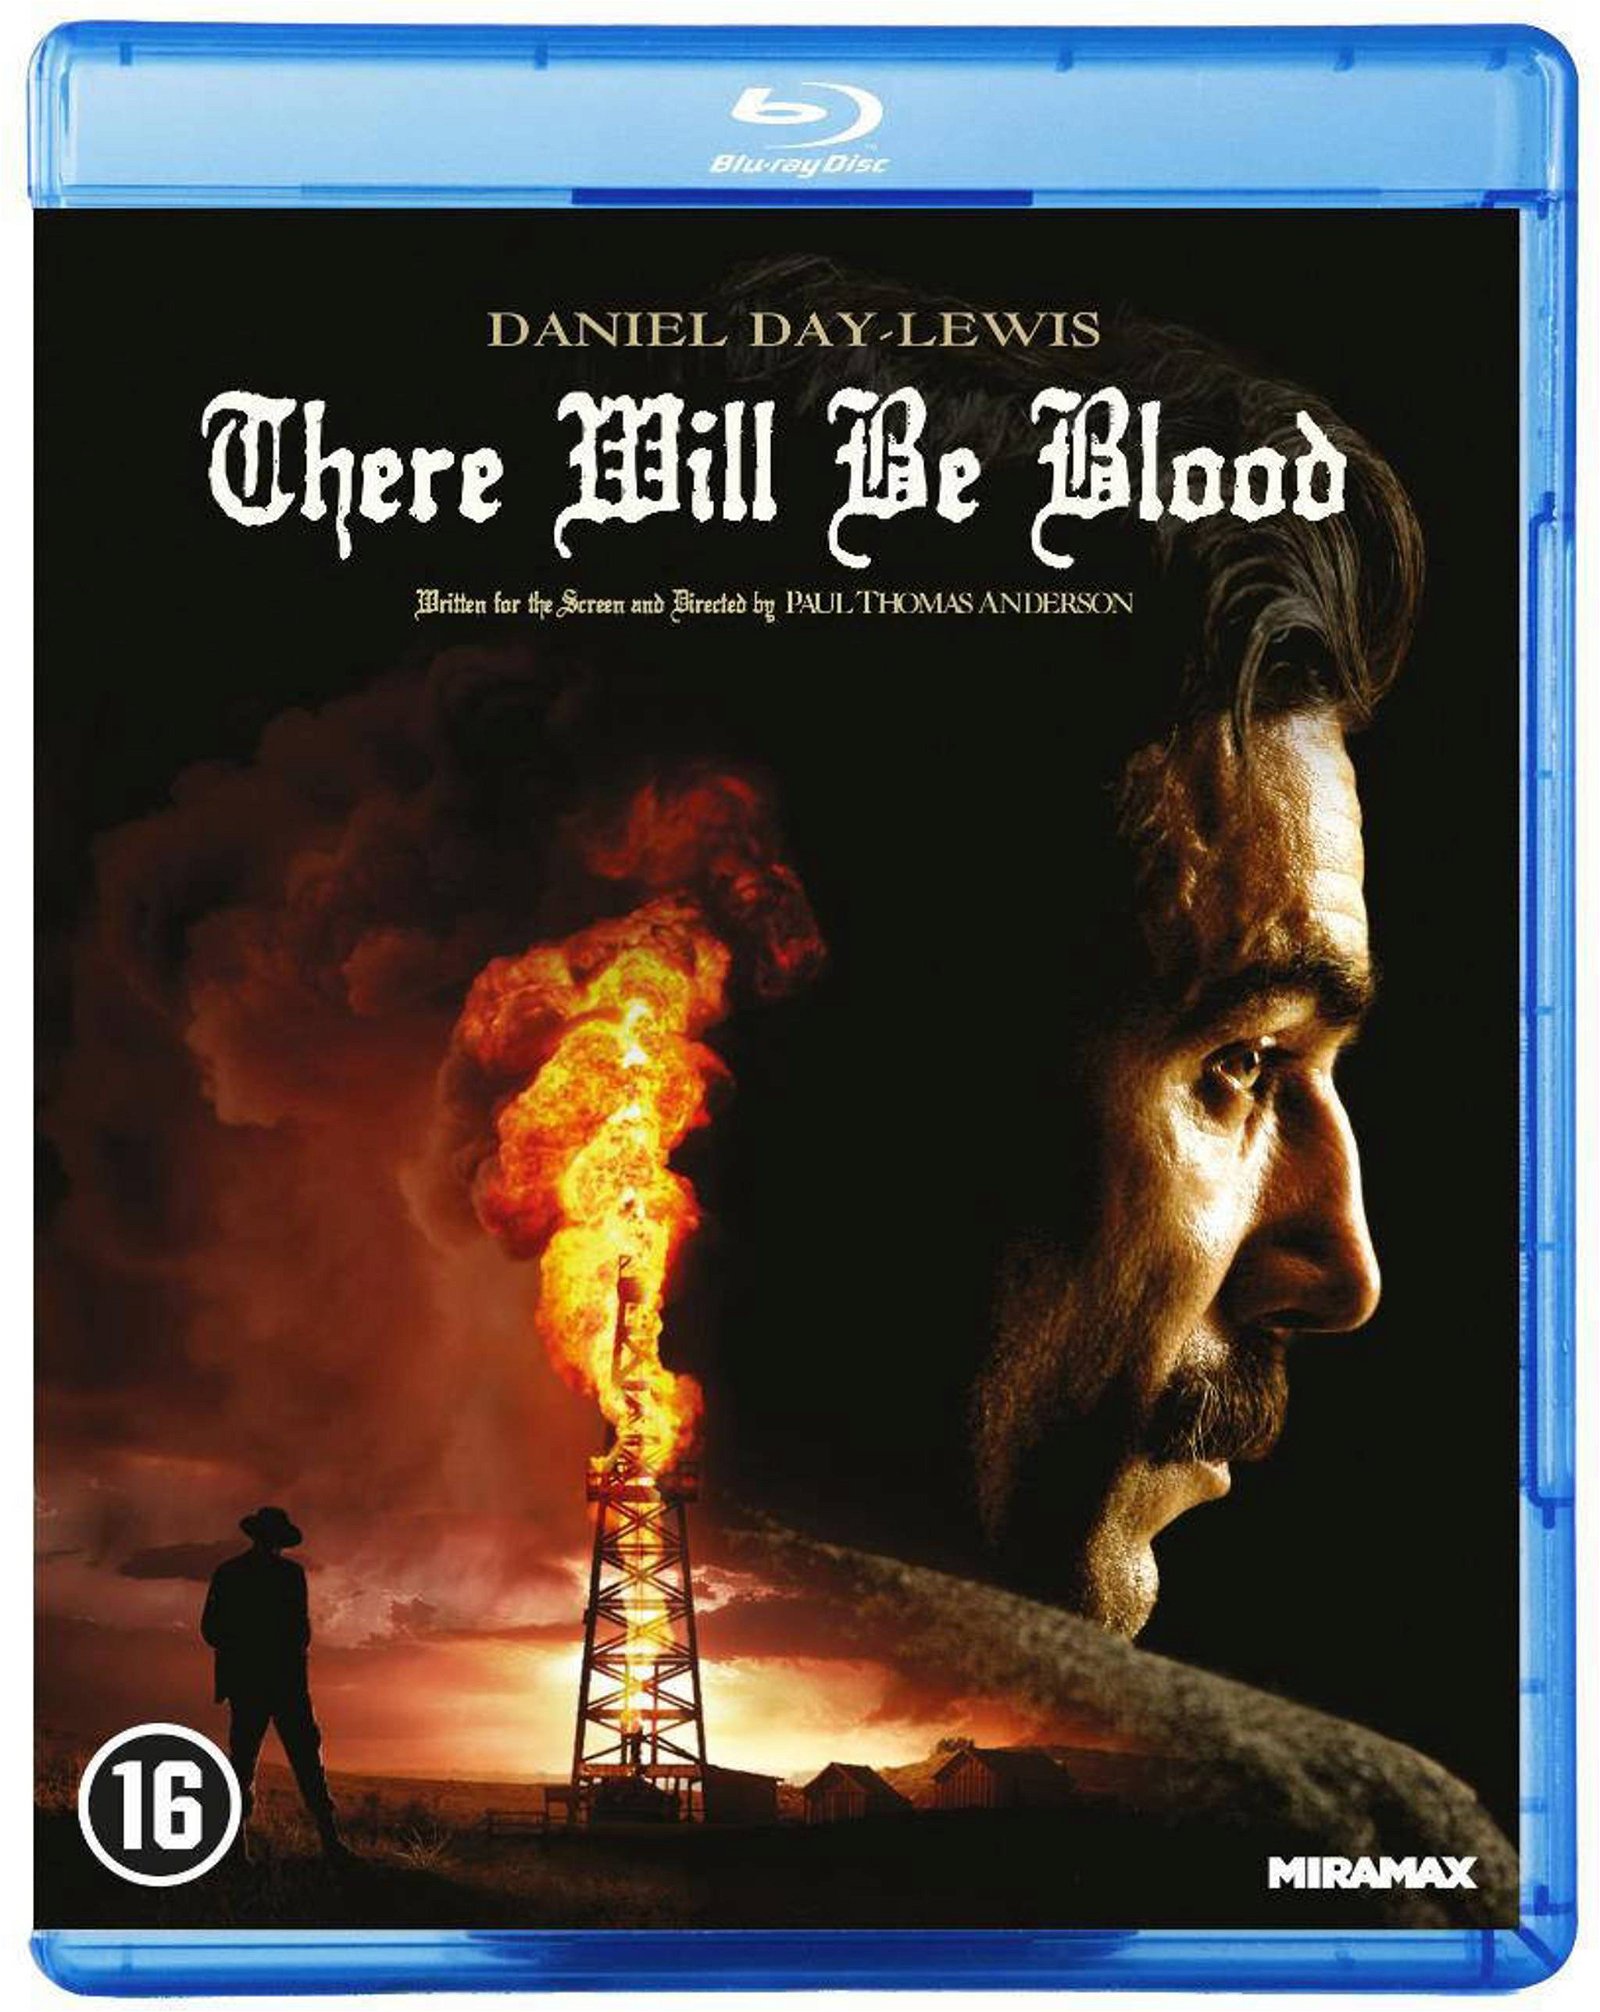 CD Shop - MOVIE THERE WILL BE BLOOD